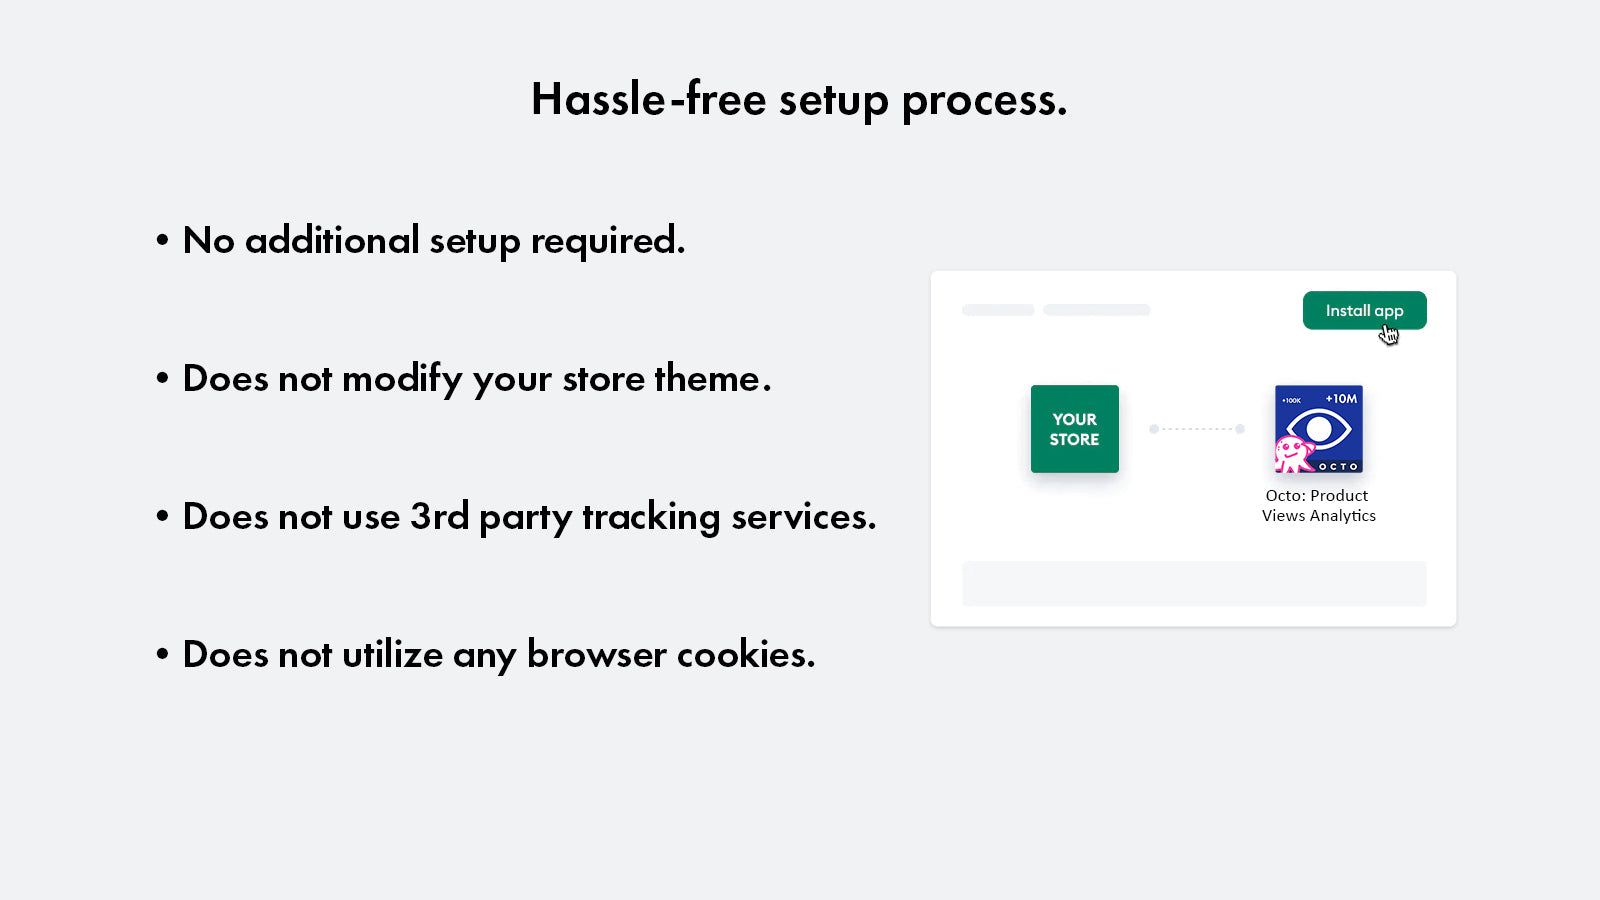 Hassle-free setup process. Does not utilize any browser cookies.